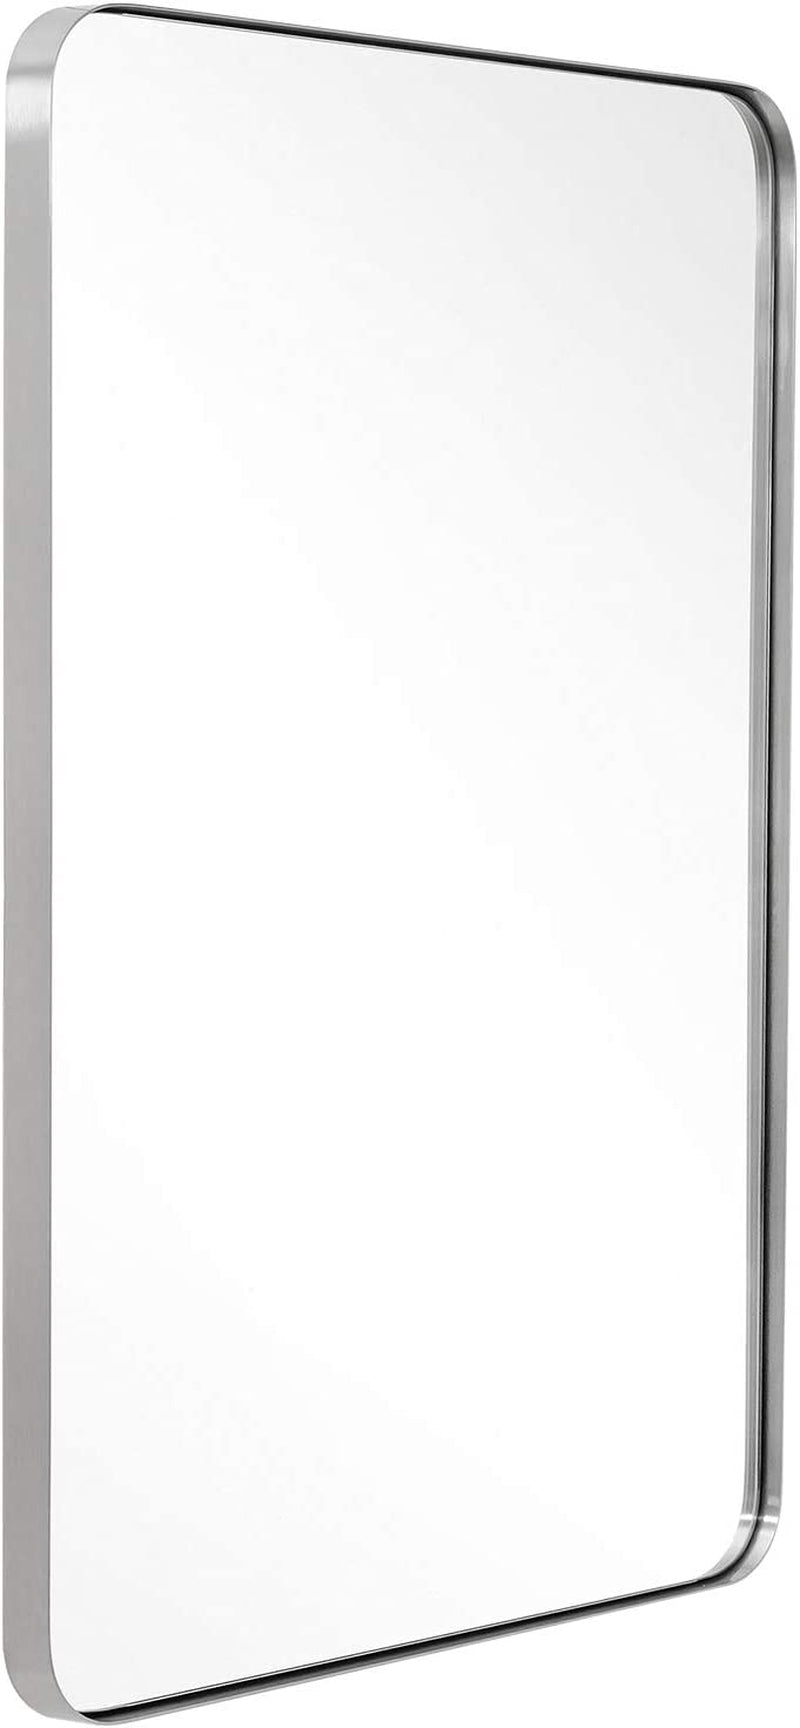 ANDY STAR Wall Mirror Brushed Nickel for Bathroom, 24X36X1 Rounded Rectangle Mirror with Stainless Steel Silver Metal Frame, Modern Bathroom Vanity Mirror